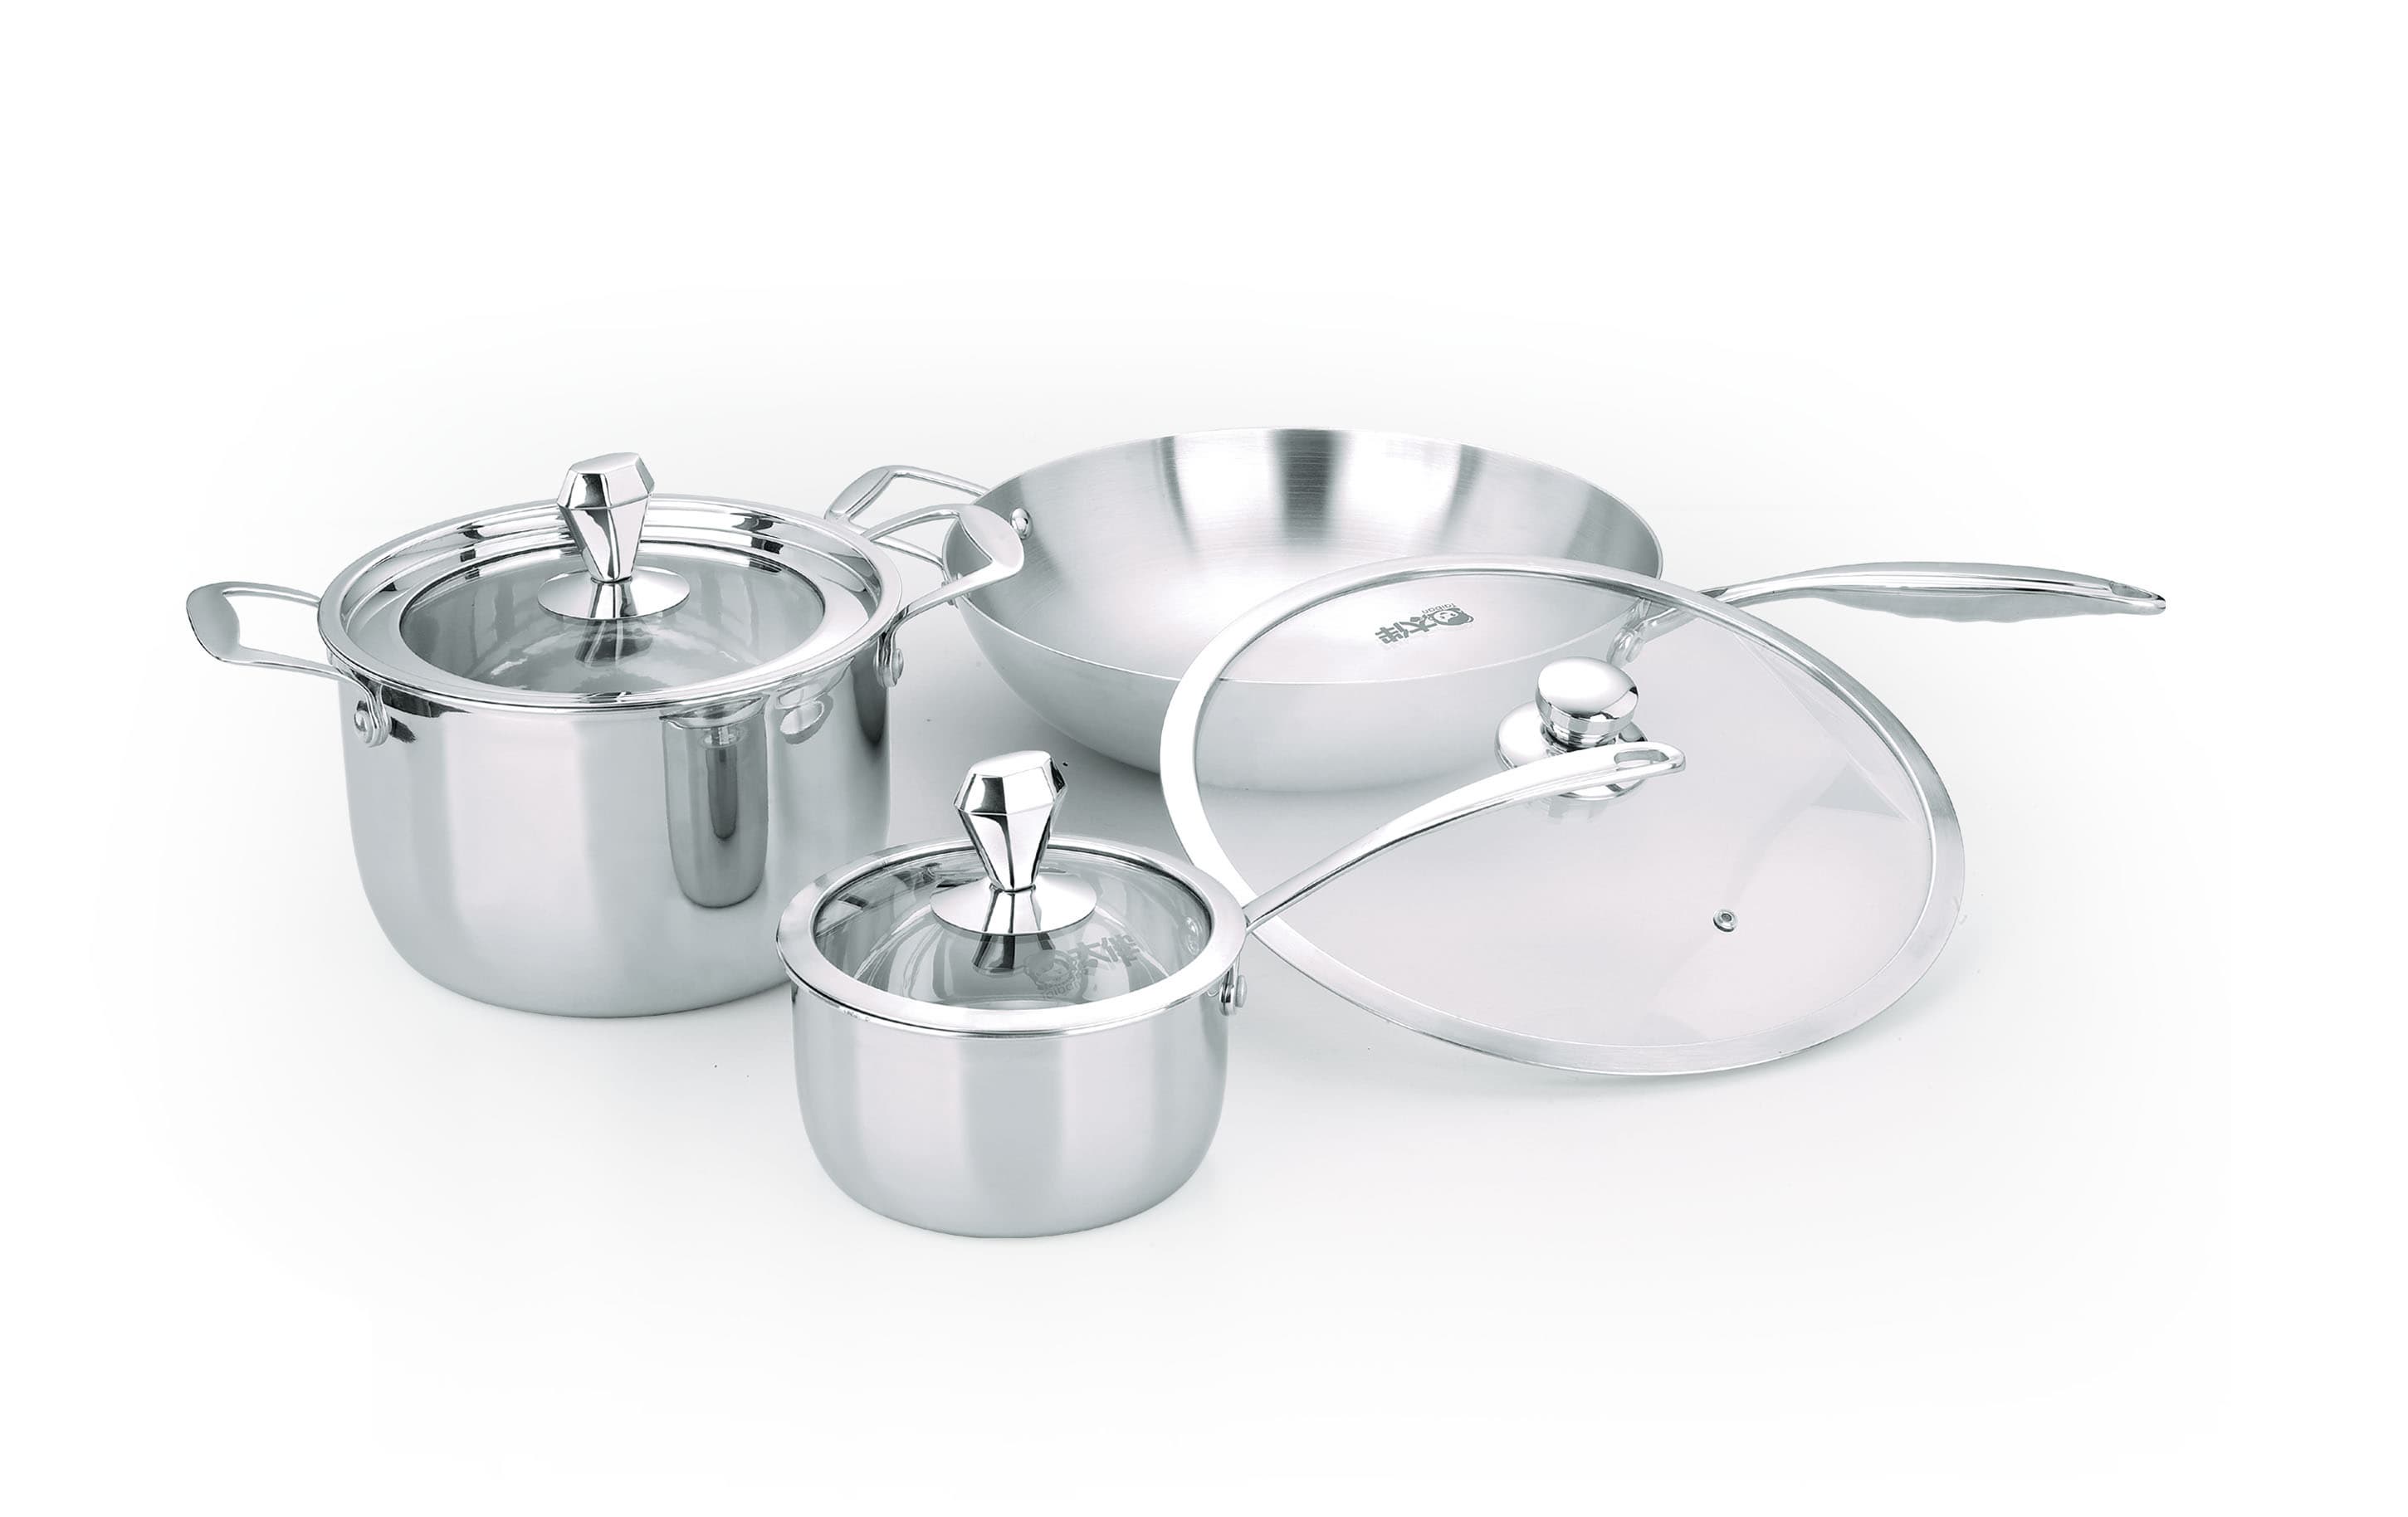 SUS304+Alluminum+SUS430  Non-sticked 3-ply stainless steel cookware sets